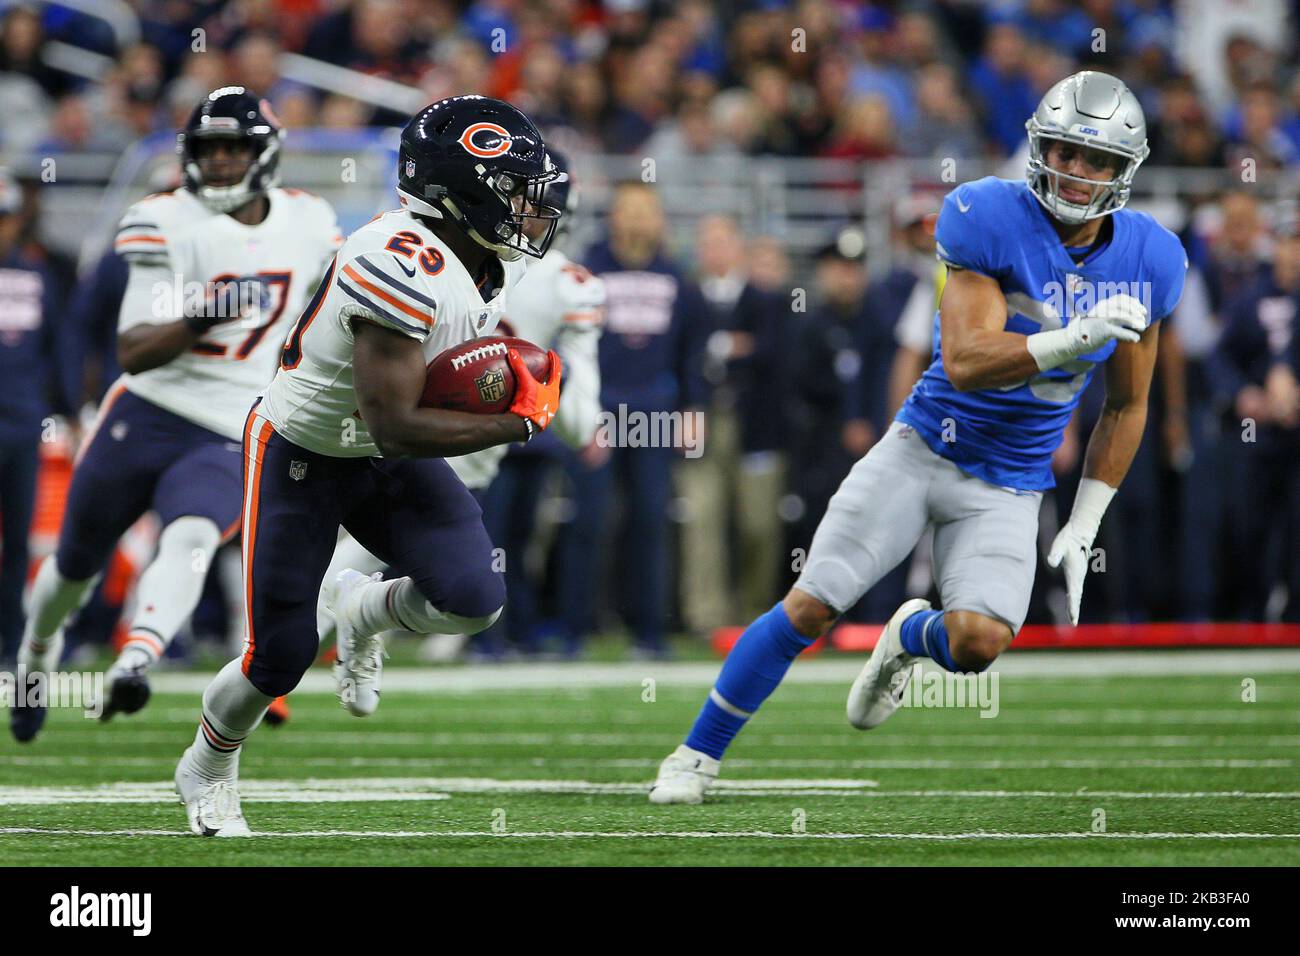 Chicago Bears running back Tarik Cohen (29) runs the ball under the pressure of Detroit Lions defensive back Miles Killebrew (35) during the first half of an NFL football game against the Detroit Lions in Detroit, Michigan USA, on Thursday, November 22, 2018. (Photo by Amy Lemus/NurPhoto) Stock Photo